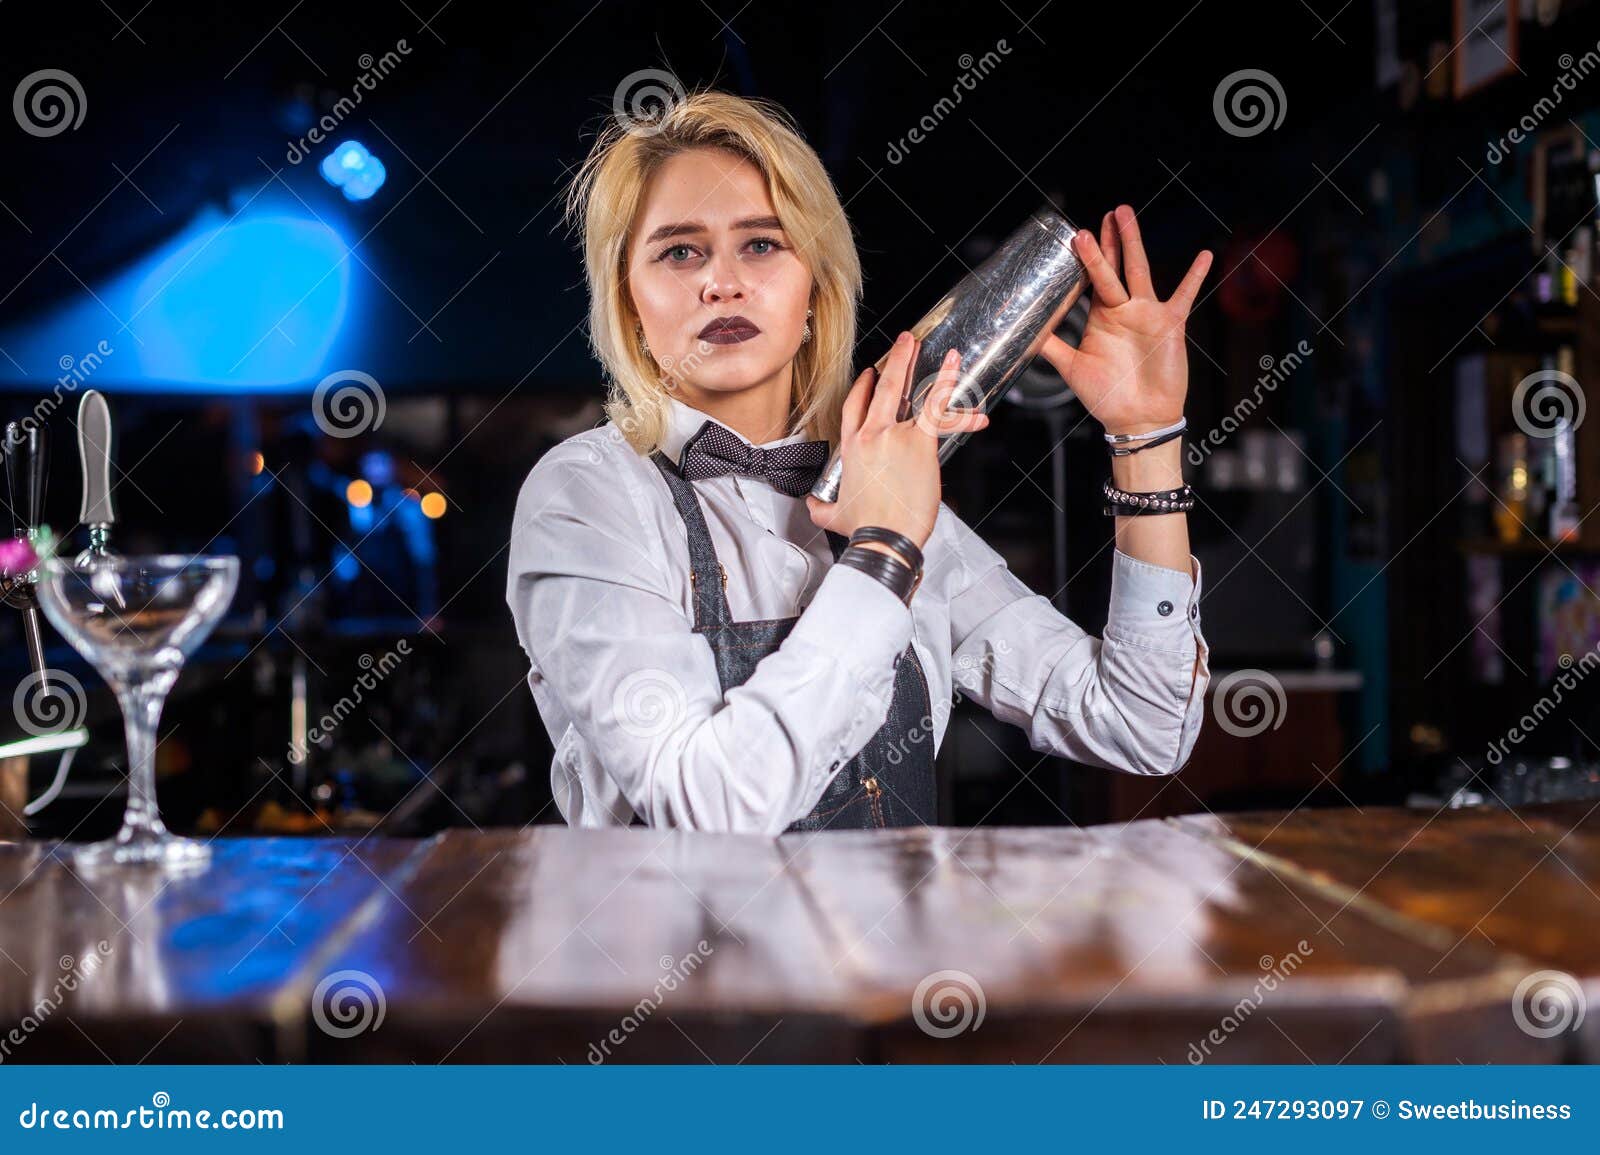 Girl Barman Makes a Cocktail at the Pothouse Stock Image - Image of ...